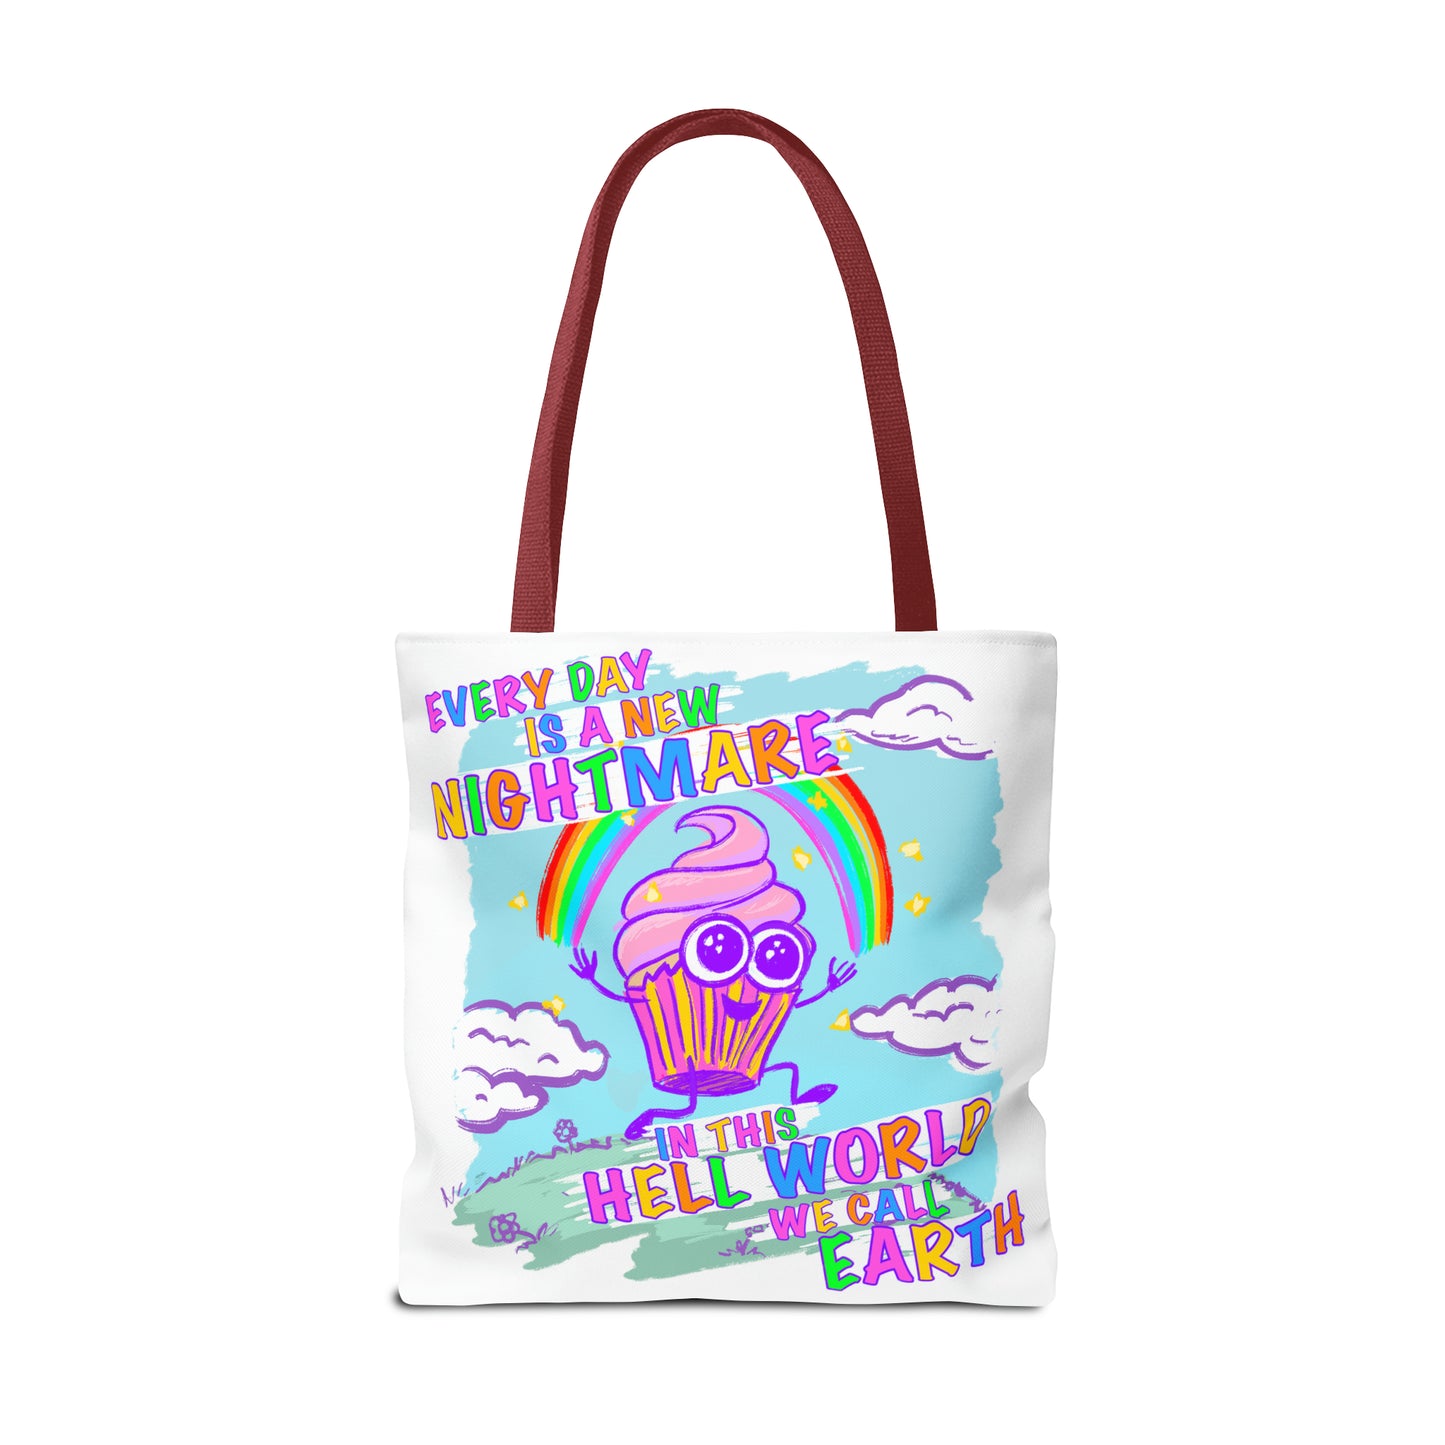 "Hell World" Tote